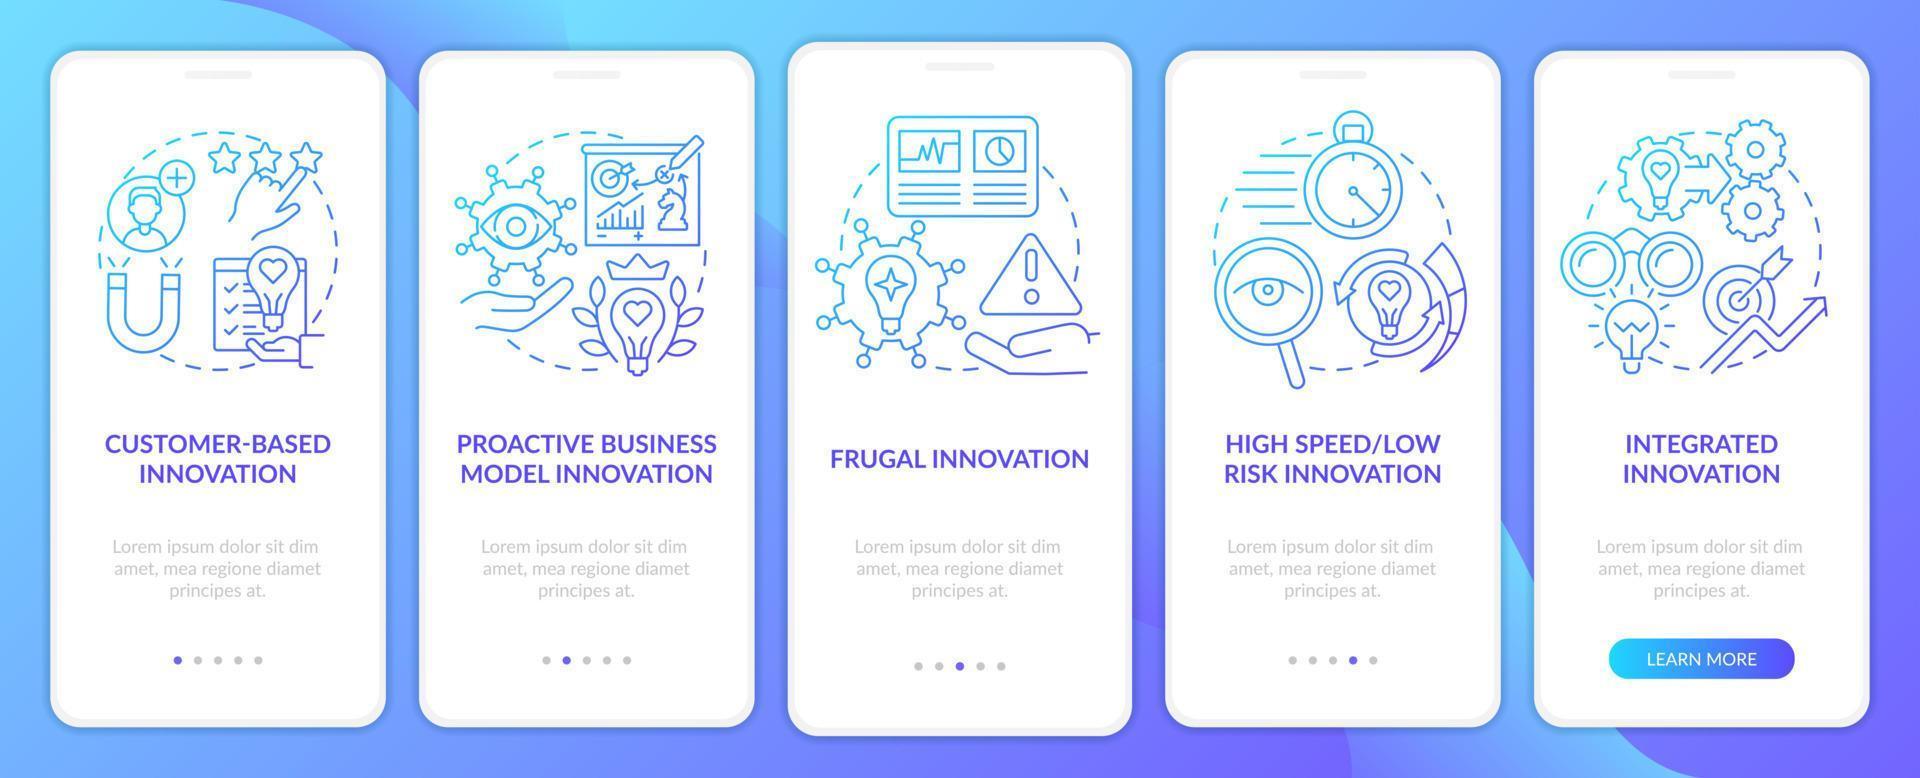 Future innovation ideas blue gradient onboarding mobile app screen. Walkthrough 5 steps graphic instructions pages with linear concepts. UI, UX, GUI template. vector